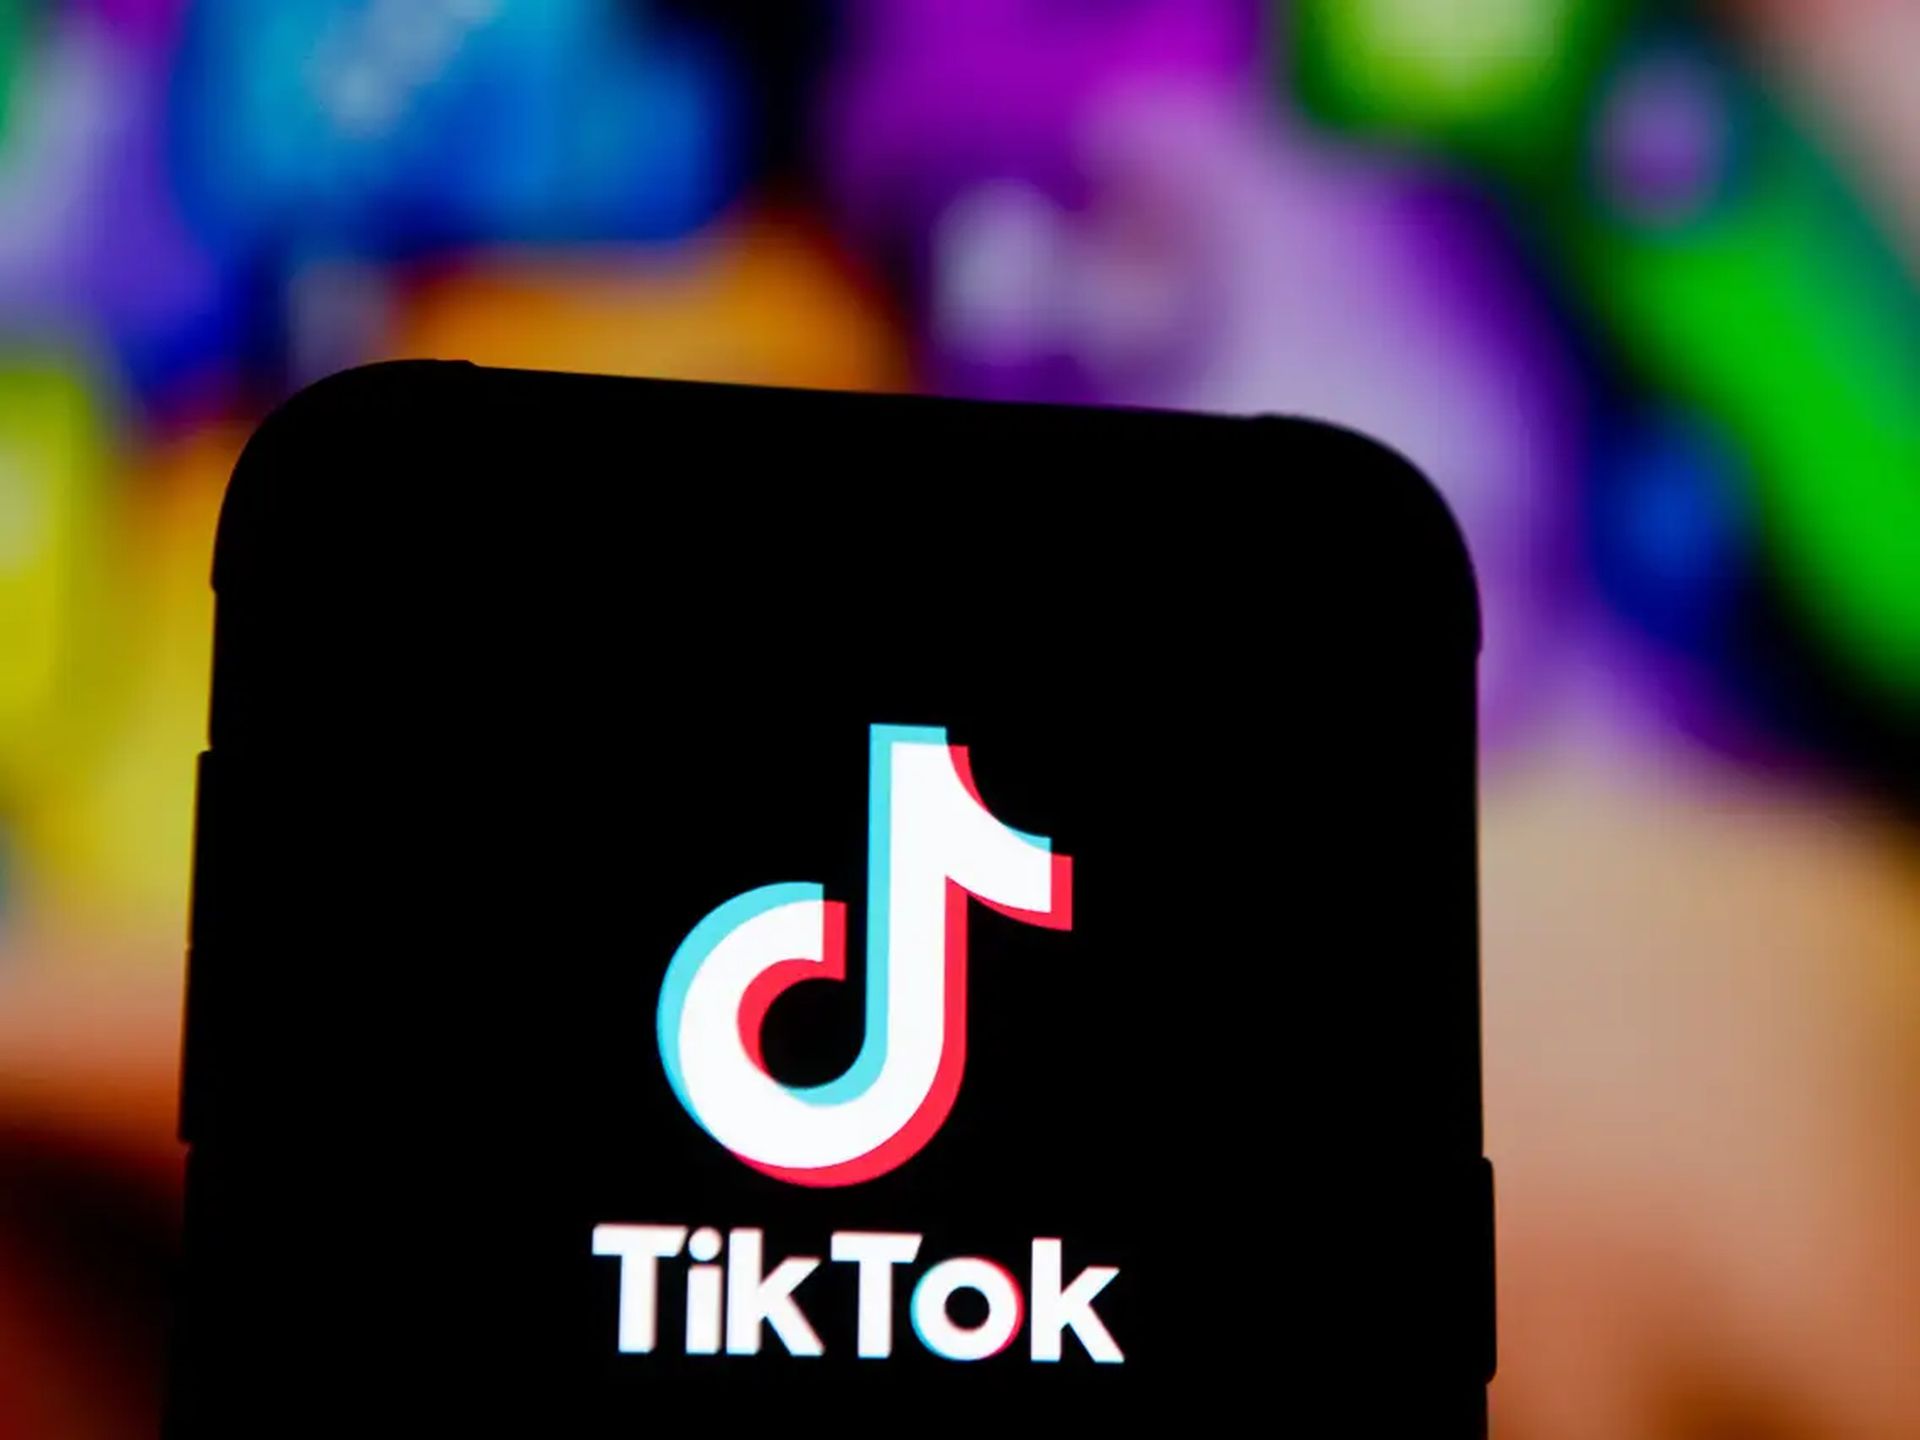 In this article, we are going to be covering how to use more than one filter on TikTok, so you can mix and match your favorite filters together.